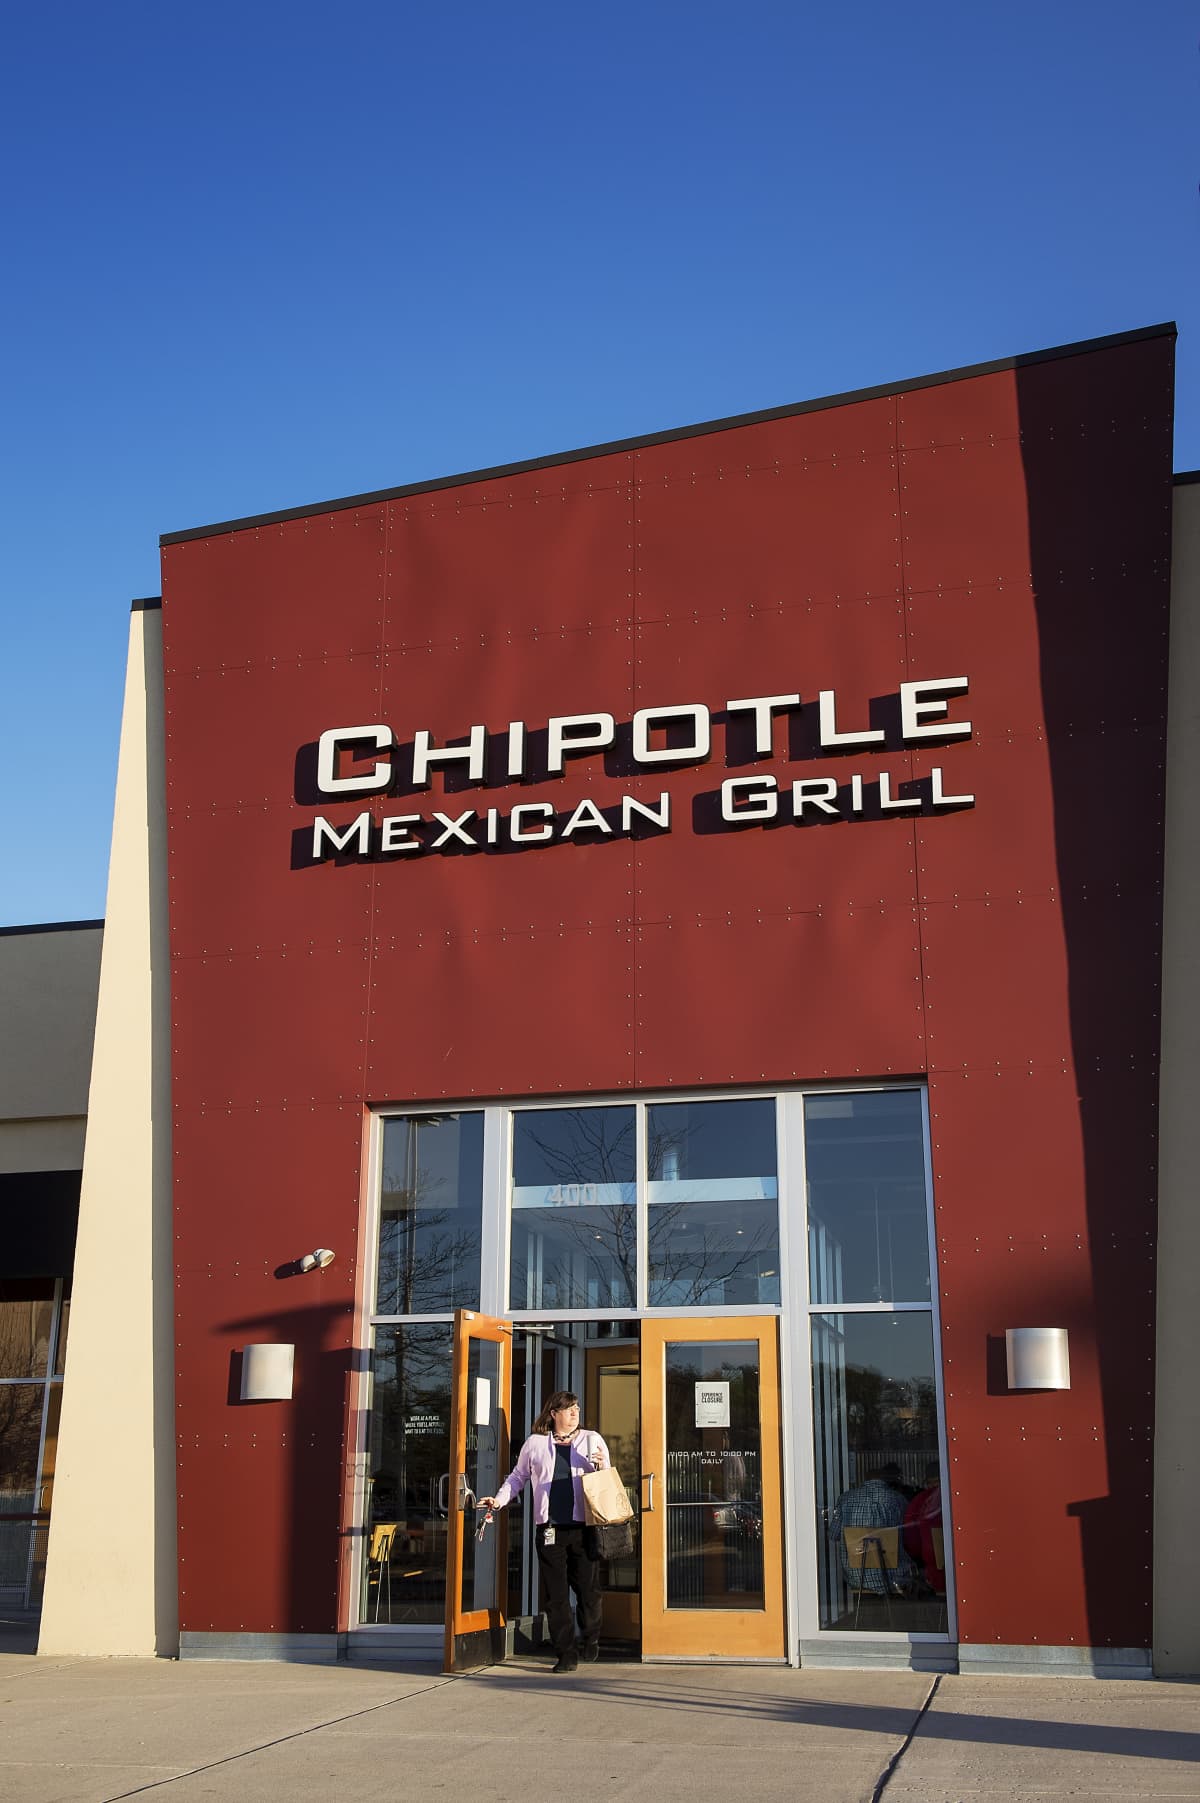 MOORESTOWN, NEW JERSEY, UNITED STATES - 2012/04/04: Chipotle Mexican Grill. (Photo by John Greim/LightRocket via Getty Images)